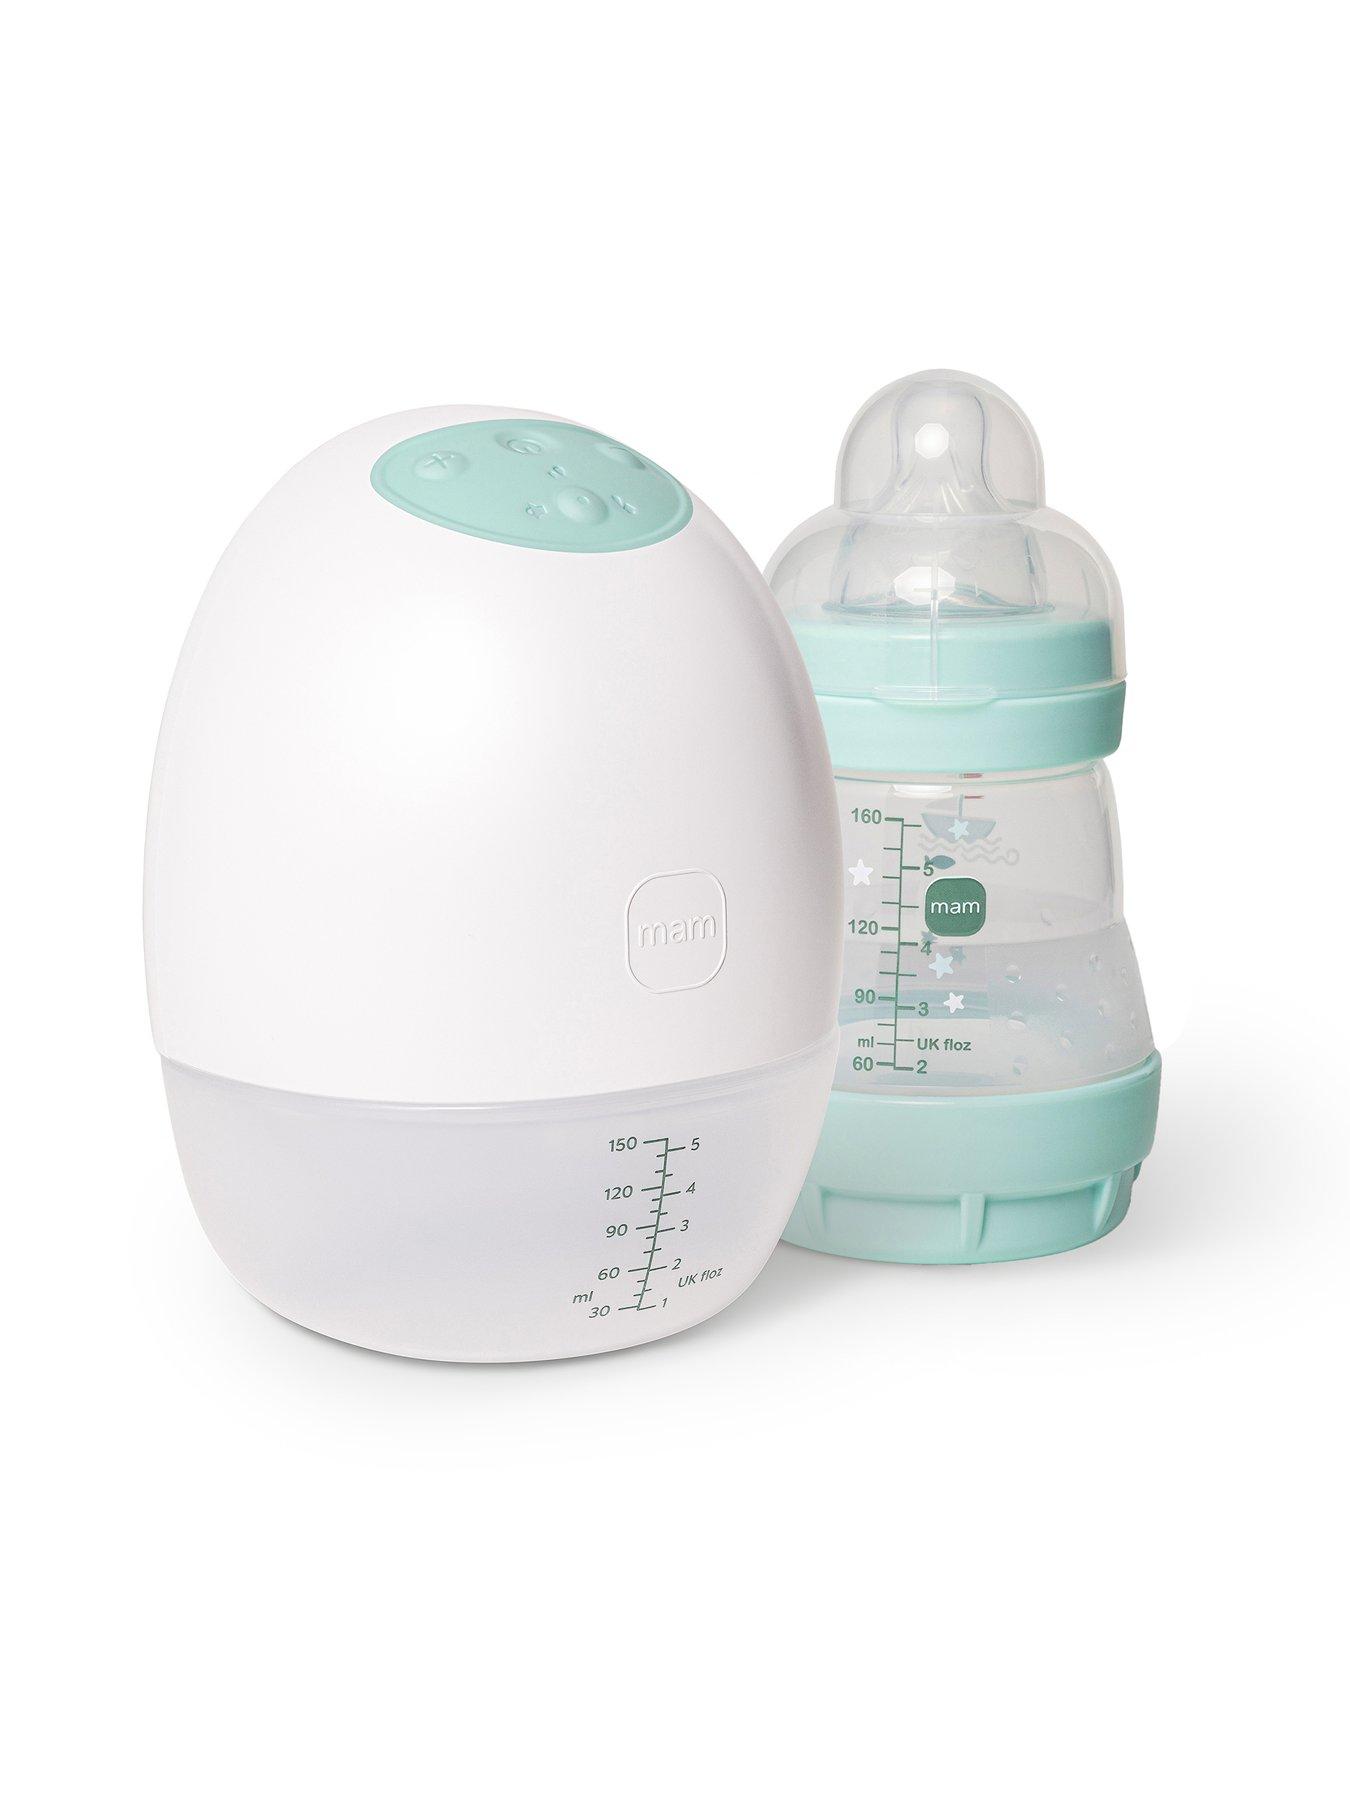 Is a Wearable Breast Pump Worth It? An Honest Review